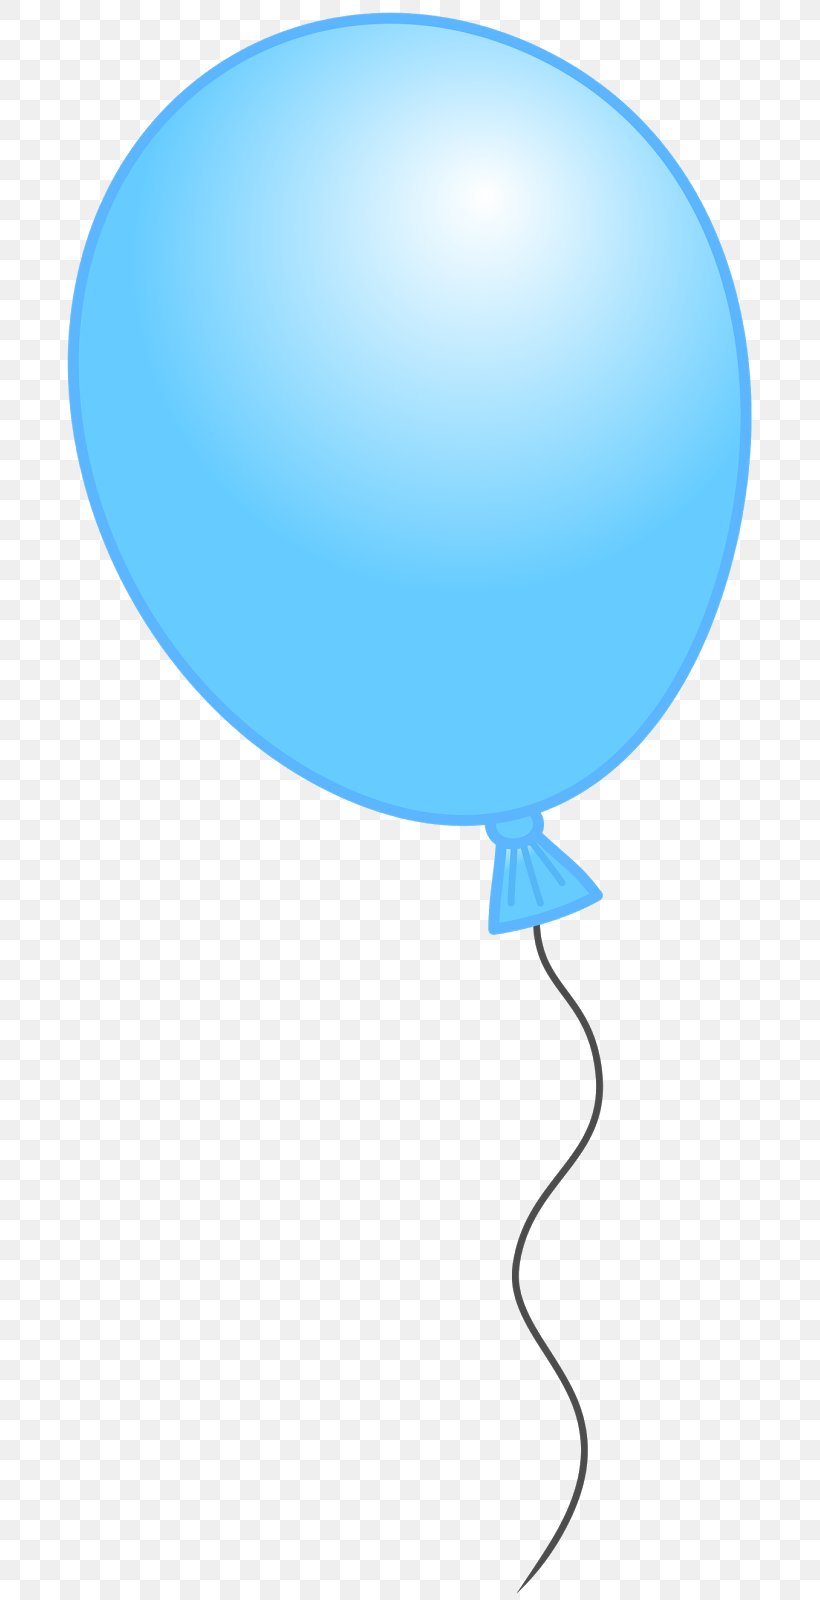 Balloon Sky Clip Art, PNG, 719x1600px, Balloon, Blue, Party Supply, Sky, Sphere Download Free